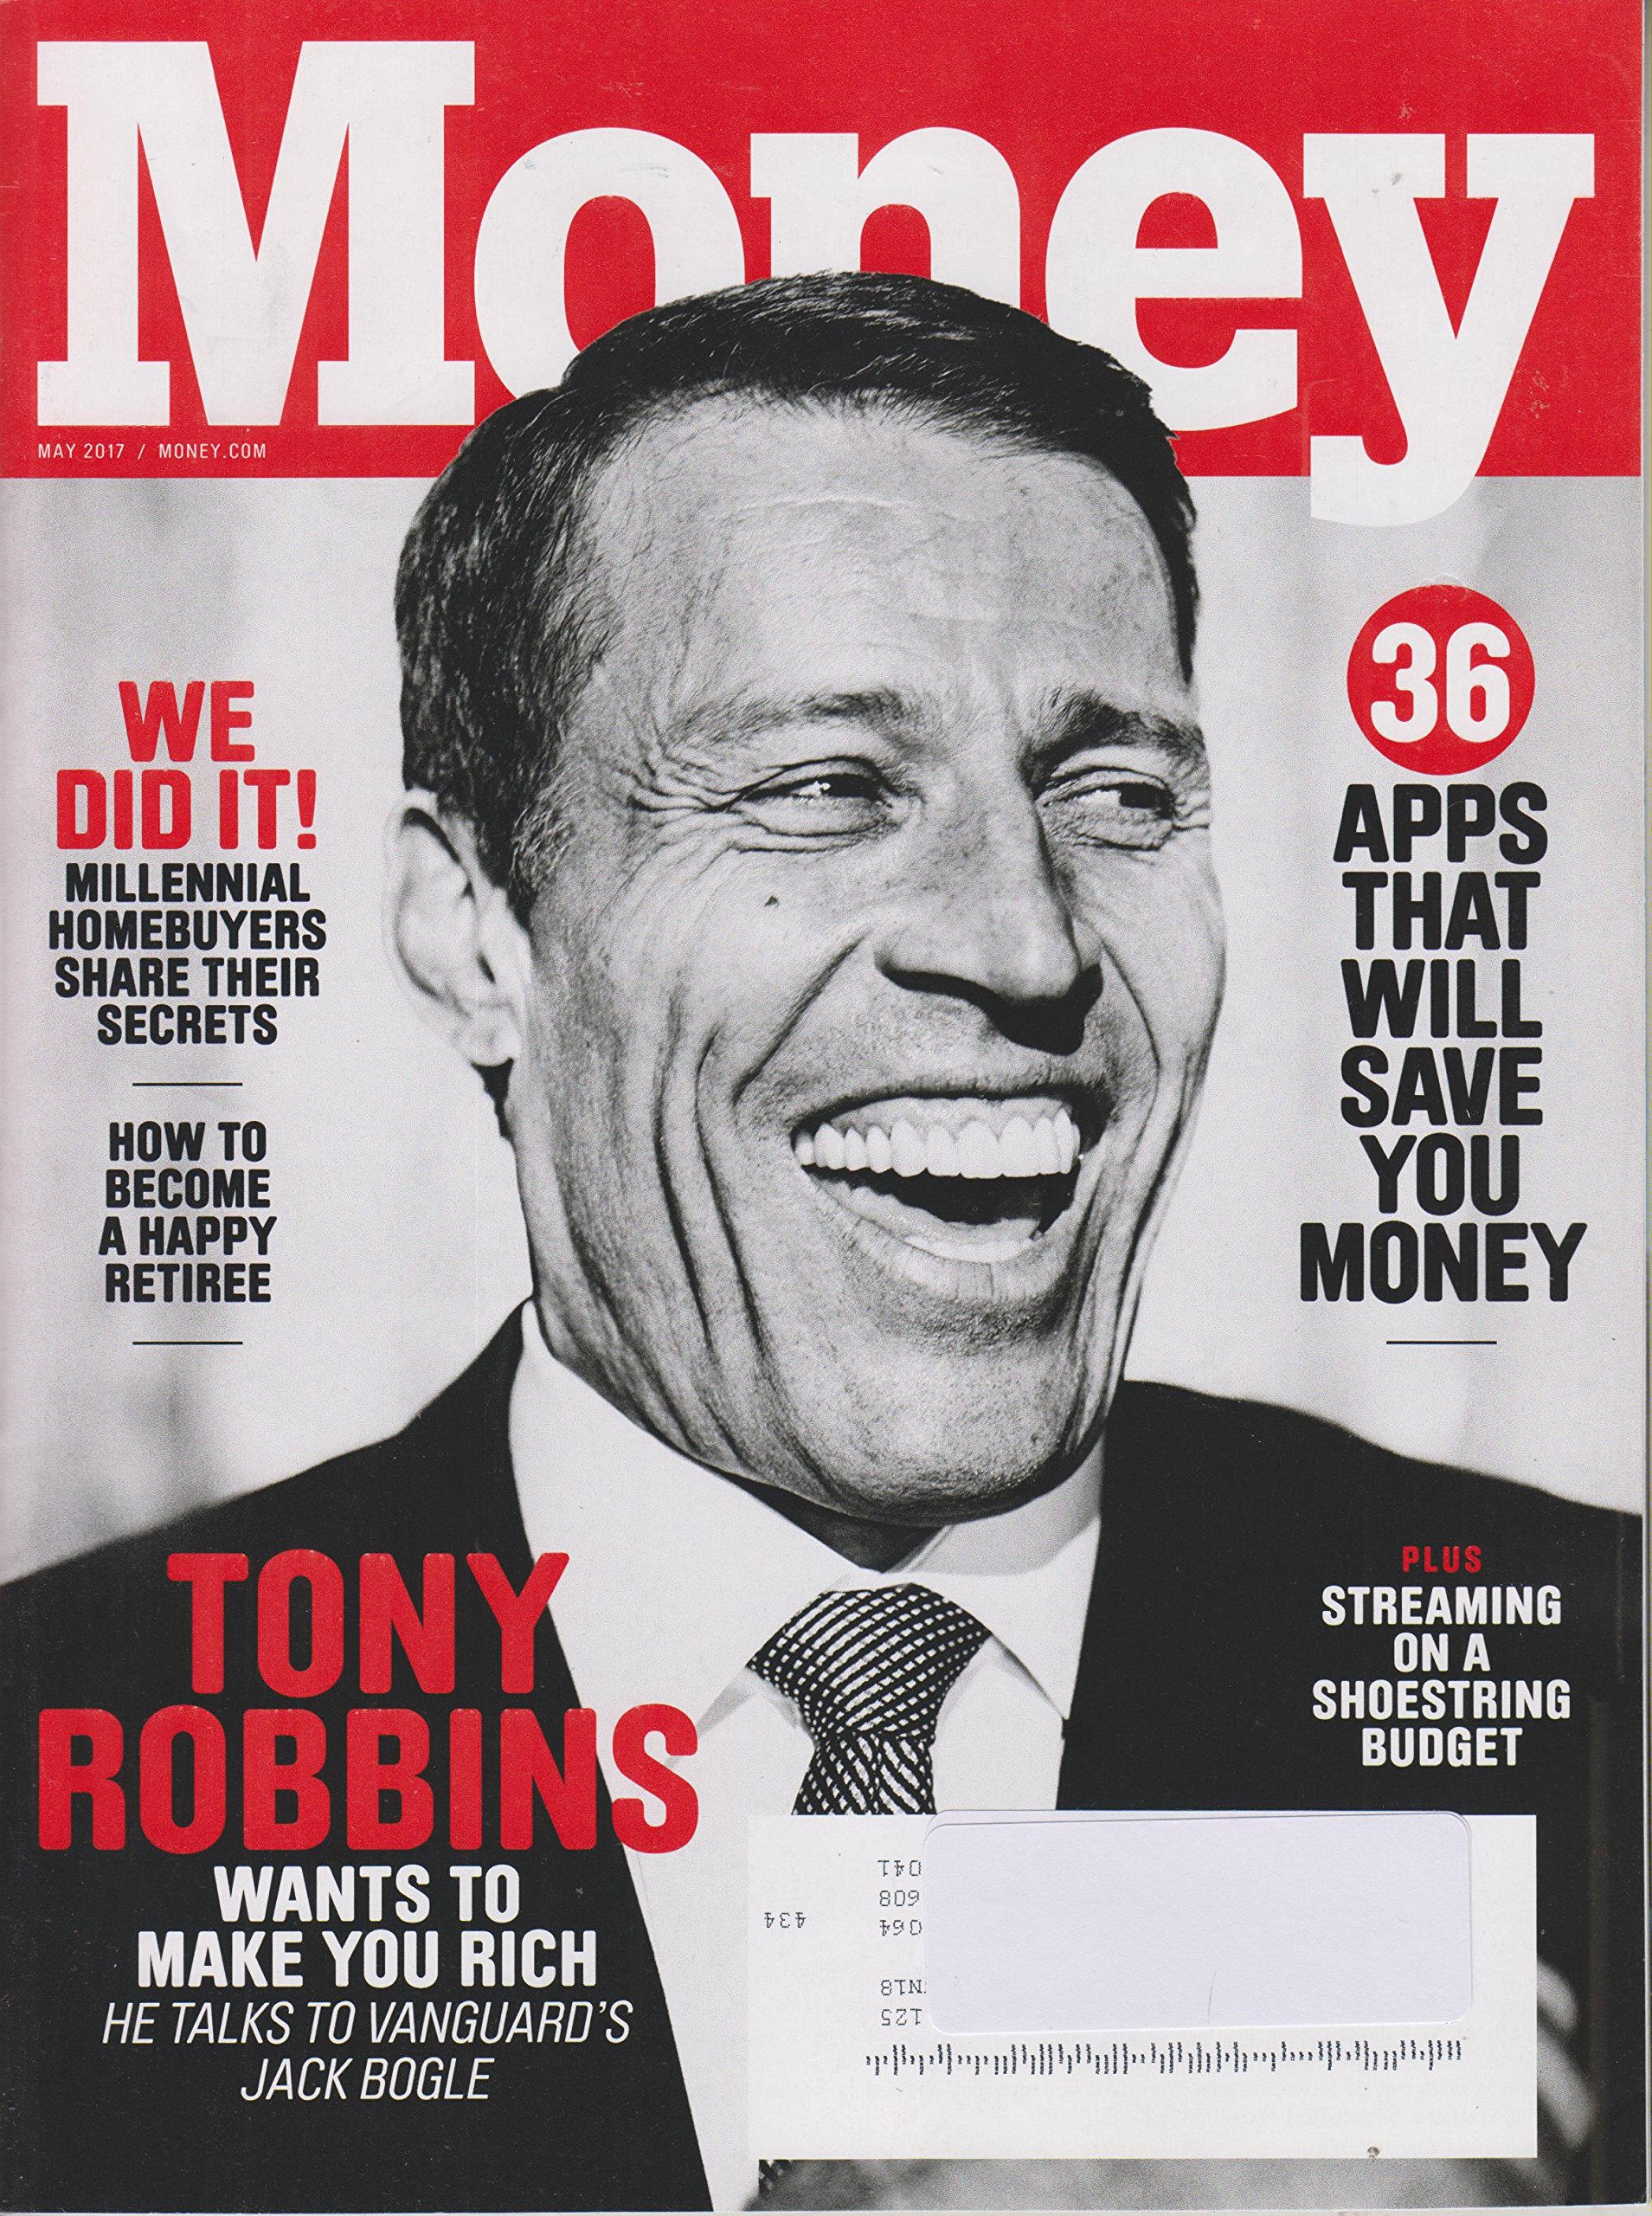 Tony Robbins wants to make you rich - the 2017 cover of "Money" magazine